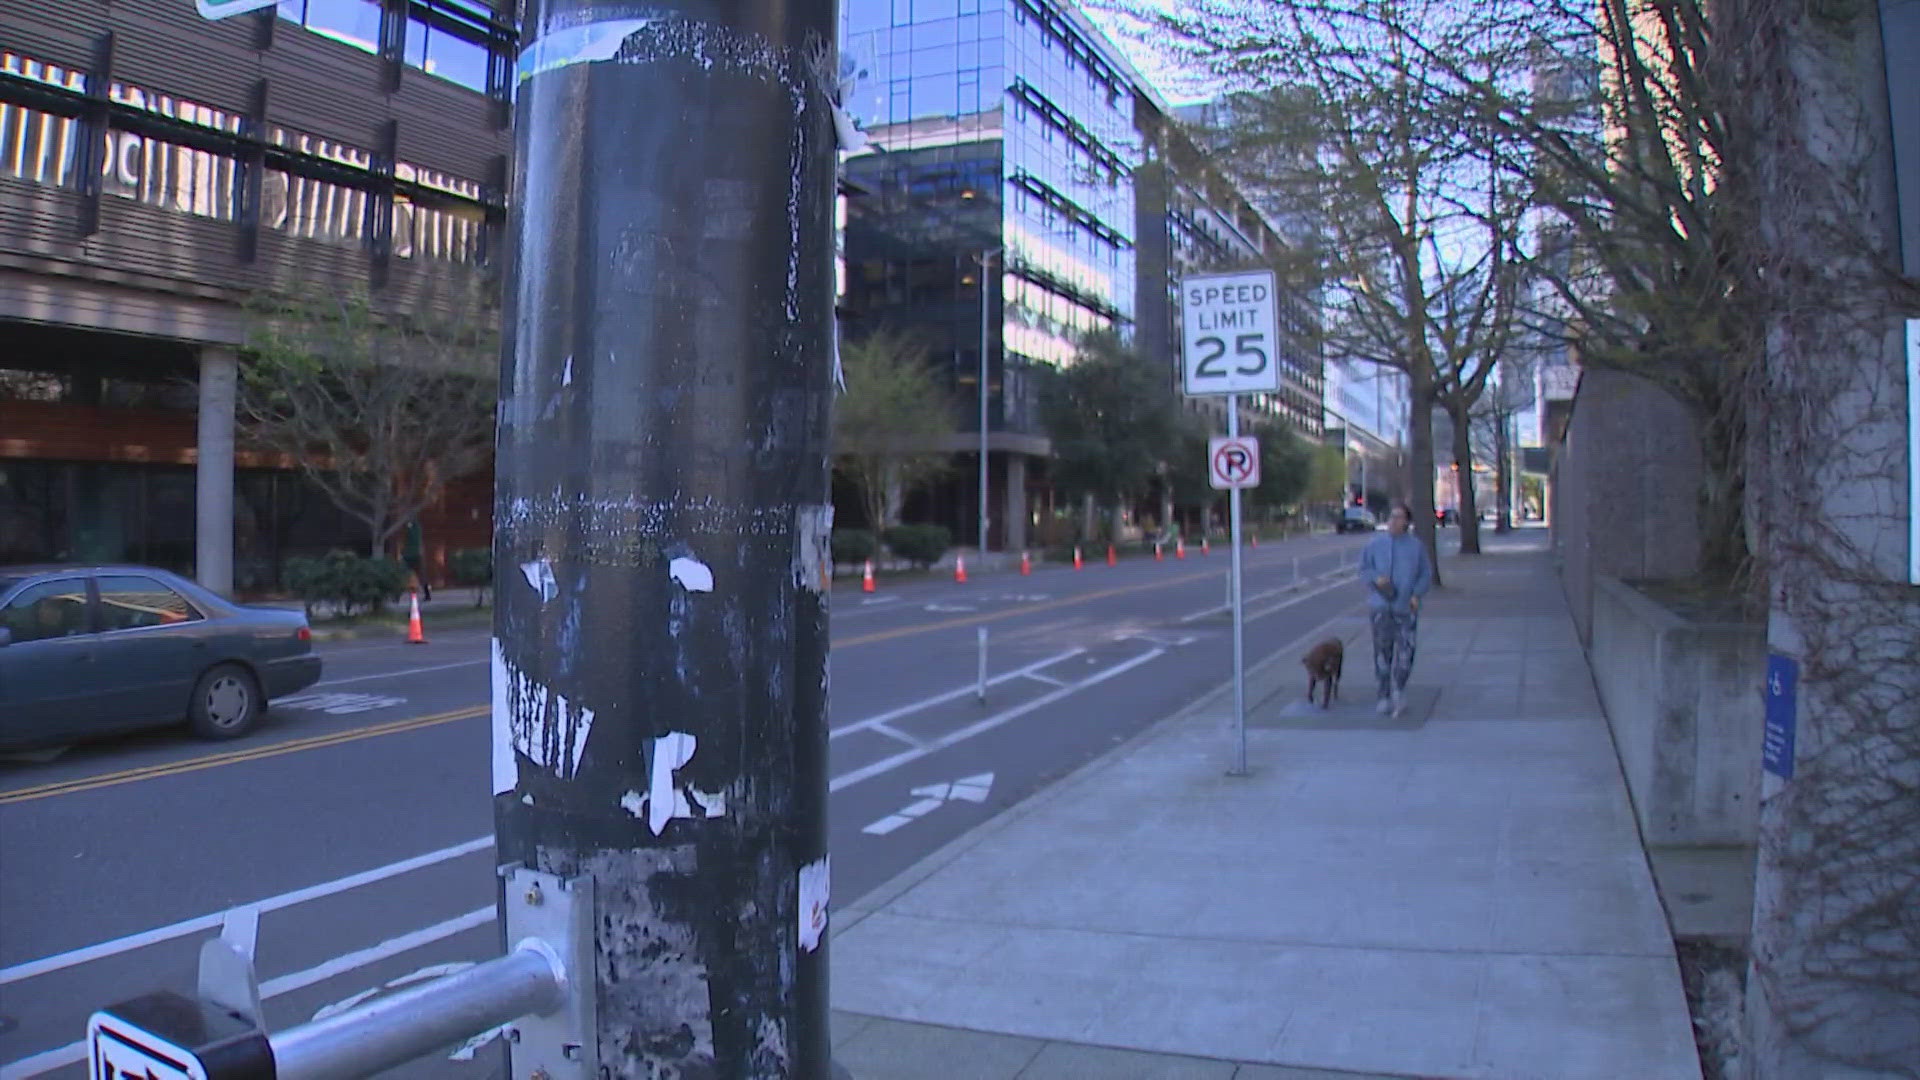 A committee is voting on a "fine tuned" version of the Seattle Transportation Levy proposal.